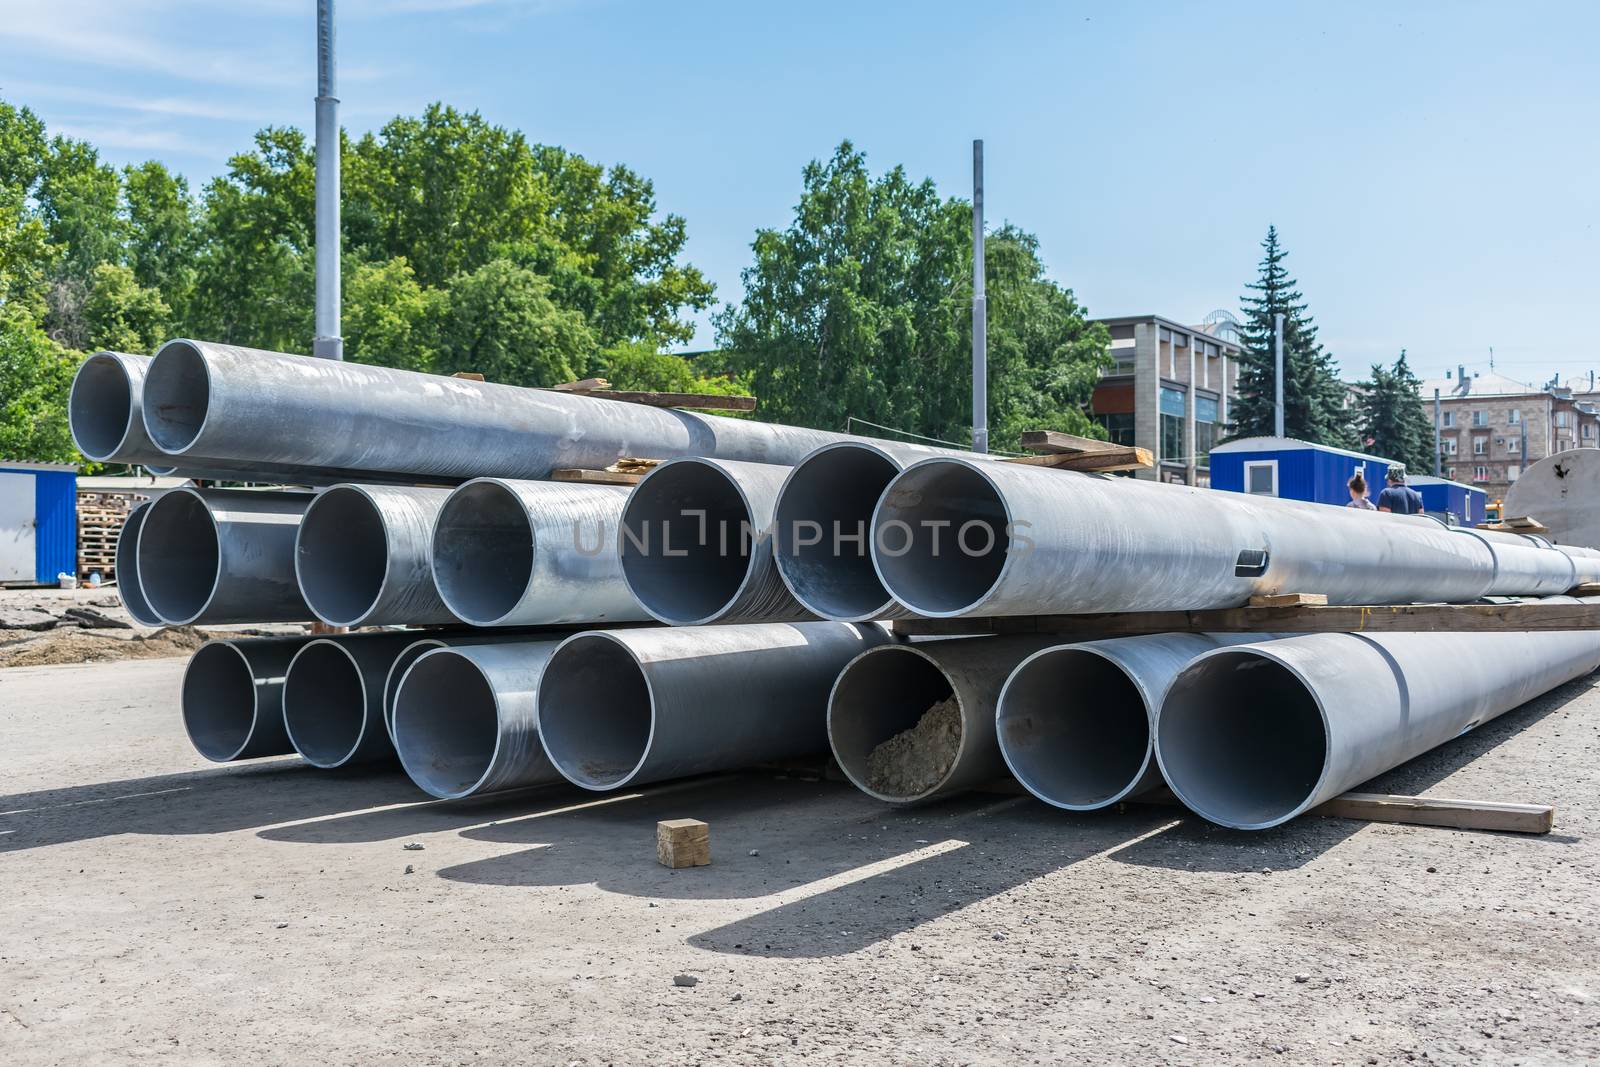 New sewer pipes for underground installation during road repairs